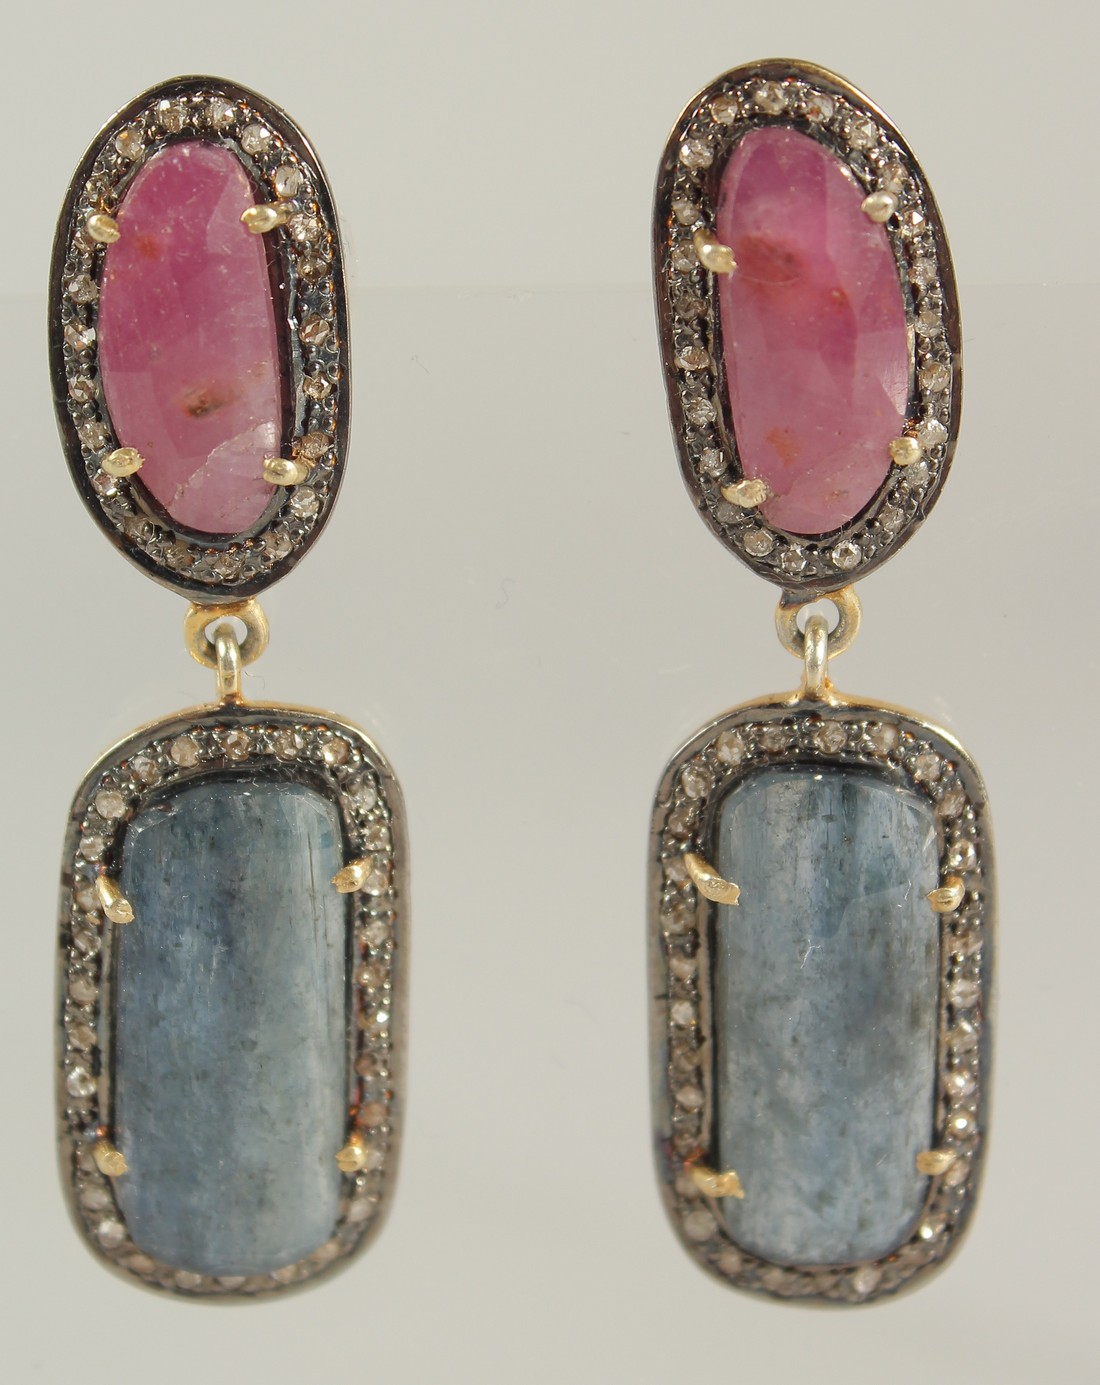 A LARGE ARTICULATED PAIR OF MIXED ROSE-CUT RED AND BLUE SAPPHIRE DROP EARRINGS IN SILVER GILT,